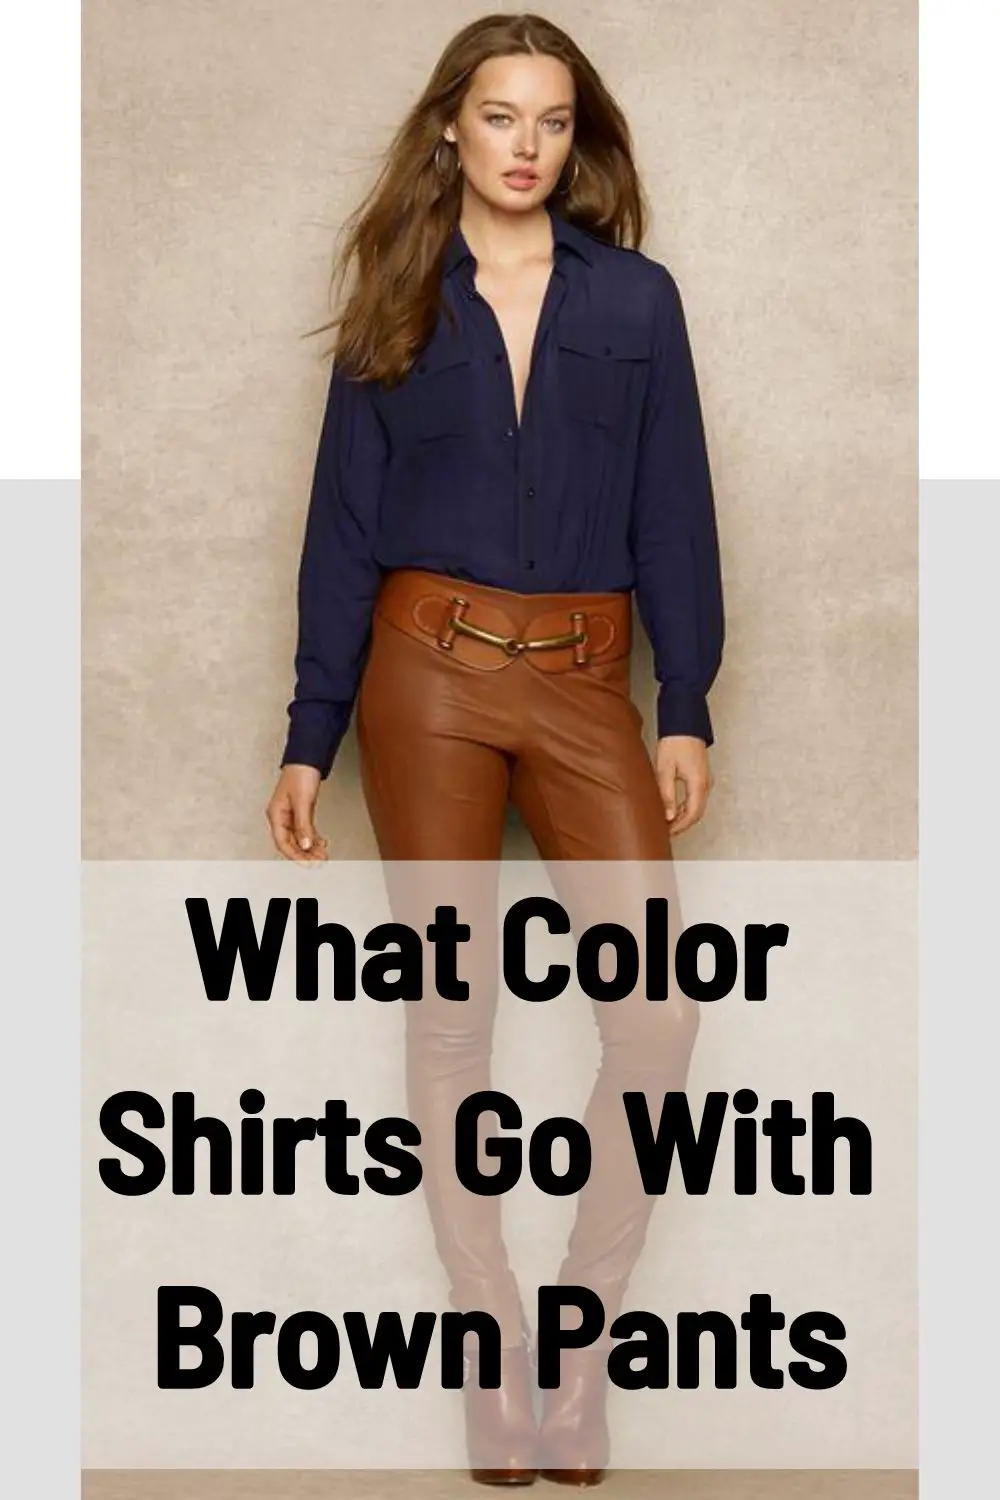 What Color Shirts Go With Brown Pants